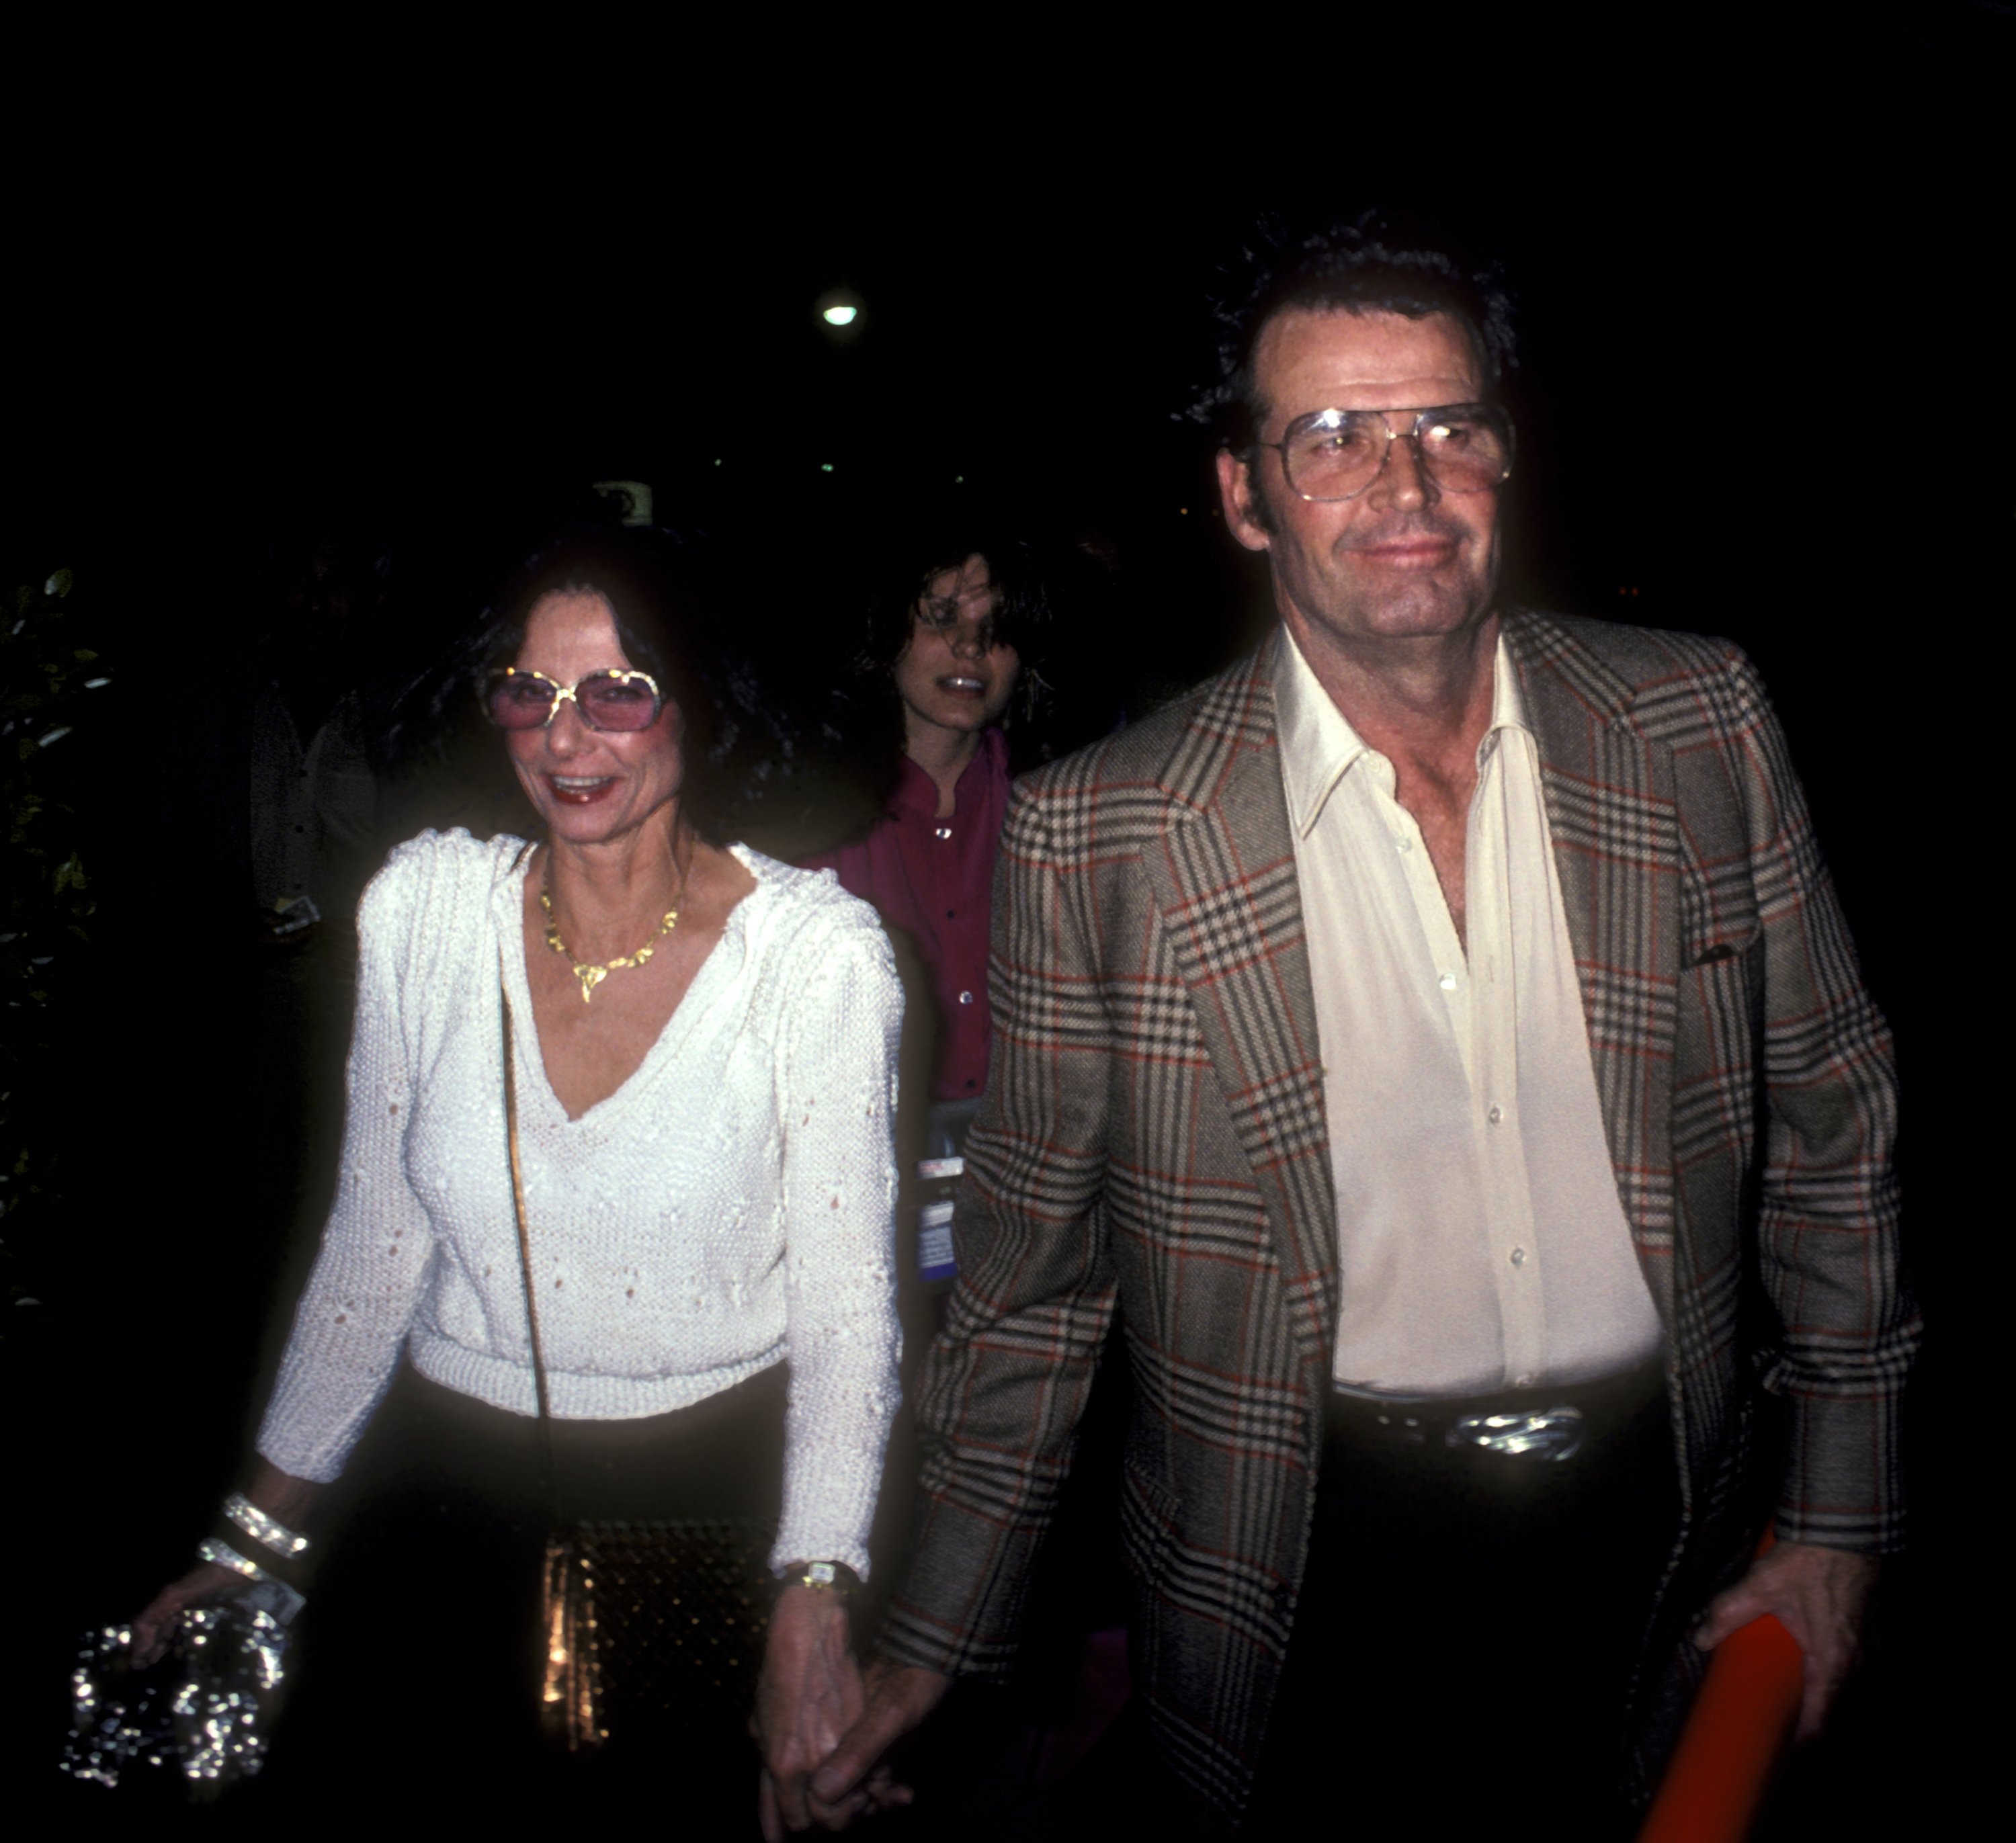 Actor James Garner and wife Lois Clarke were sighted on April 7, 1980, at Le Dome Restaurant in West Hollywood, California. | Source: Getty Images